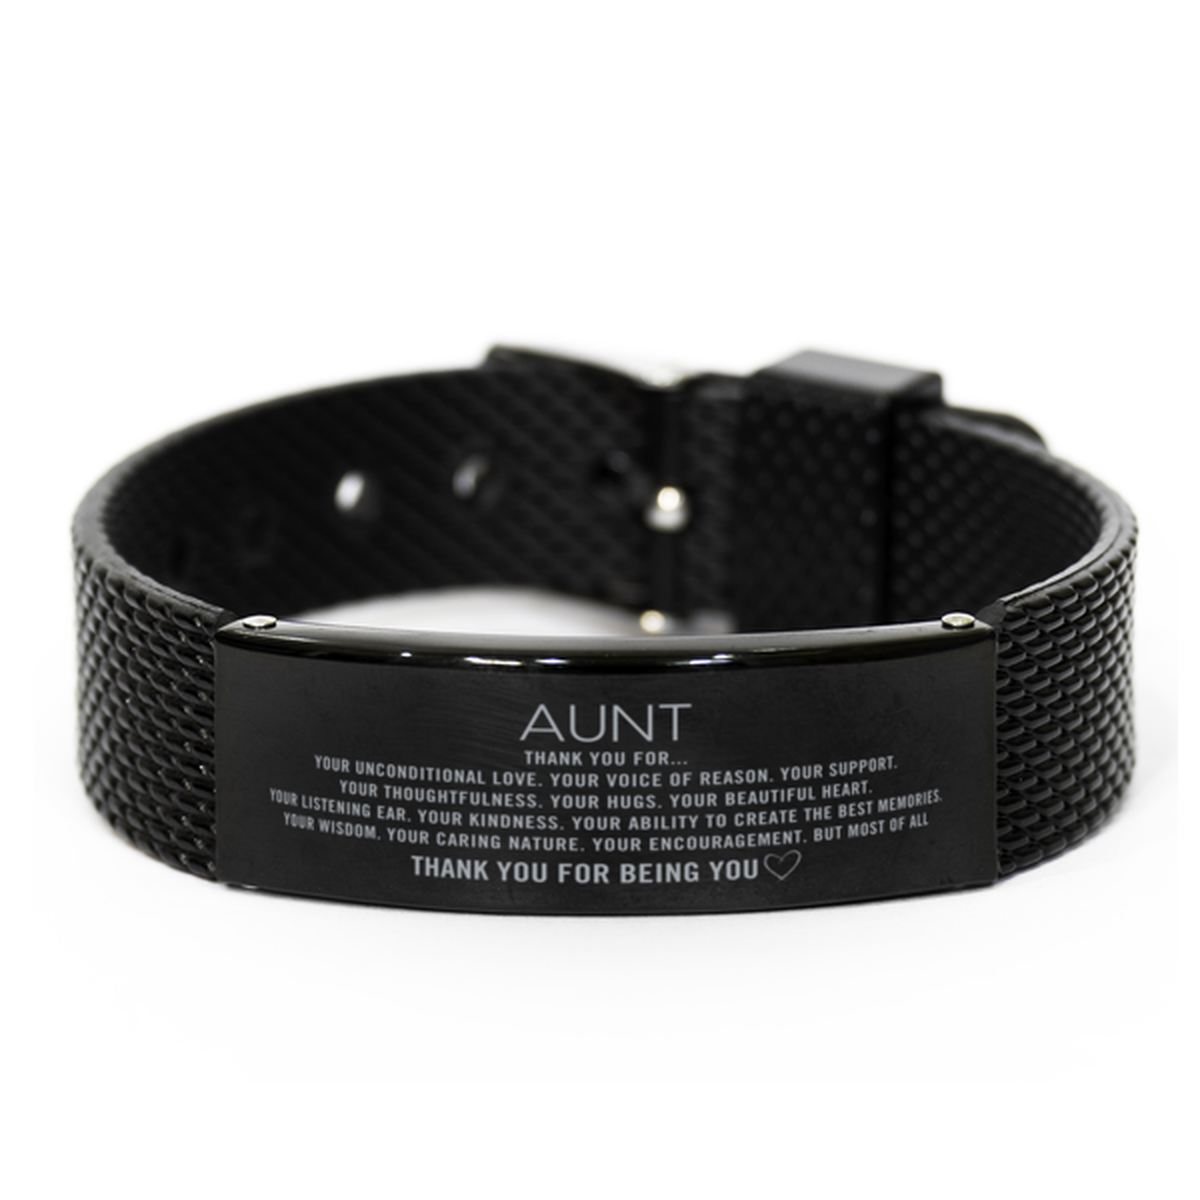 Aunt Black Shark Mesh Bracelet Custom, Engraved Gifts For Aunt Christmas Graduation Birthday Gifts for Men Women Aunt Thank you for Your unconditional love